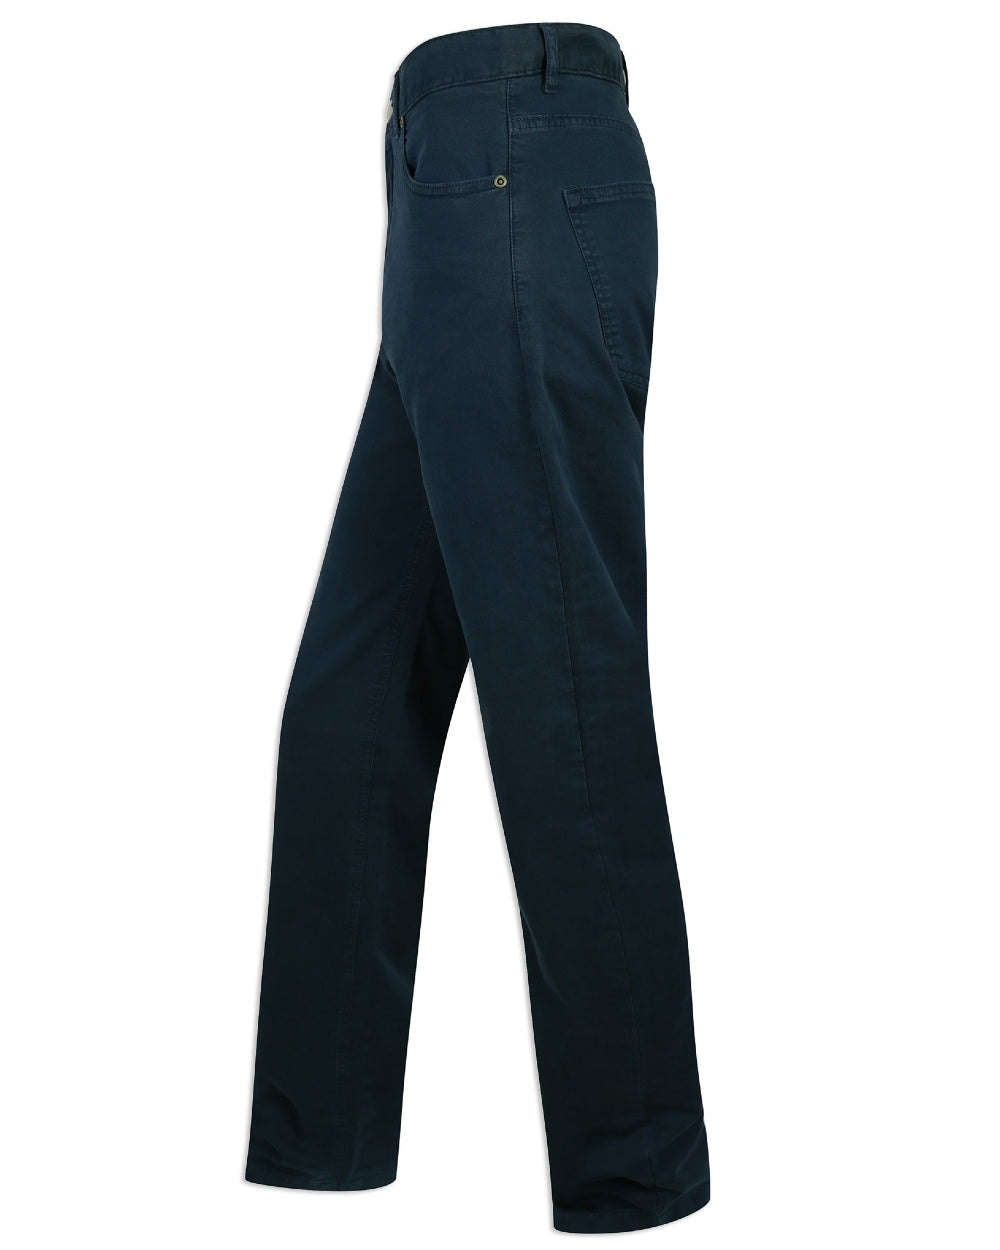 Navy coloured Hoggs of Fife Dingwall Jeans on white background 